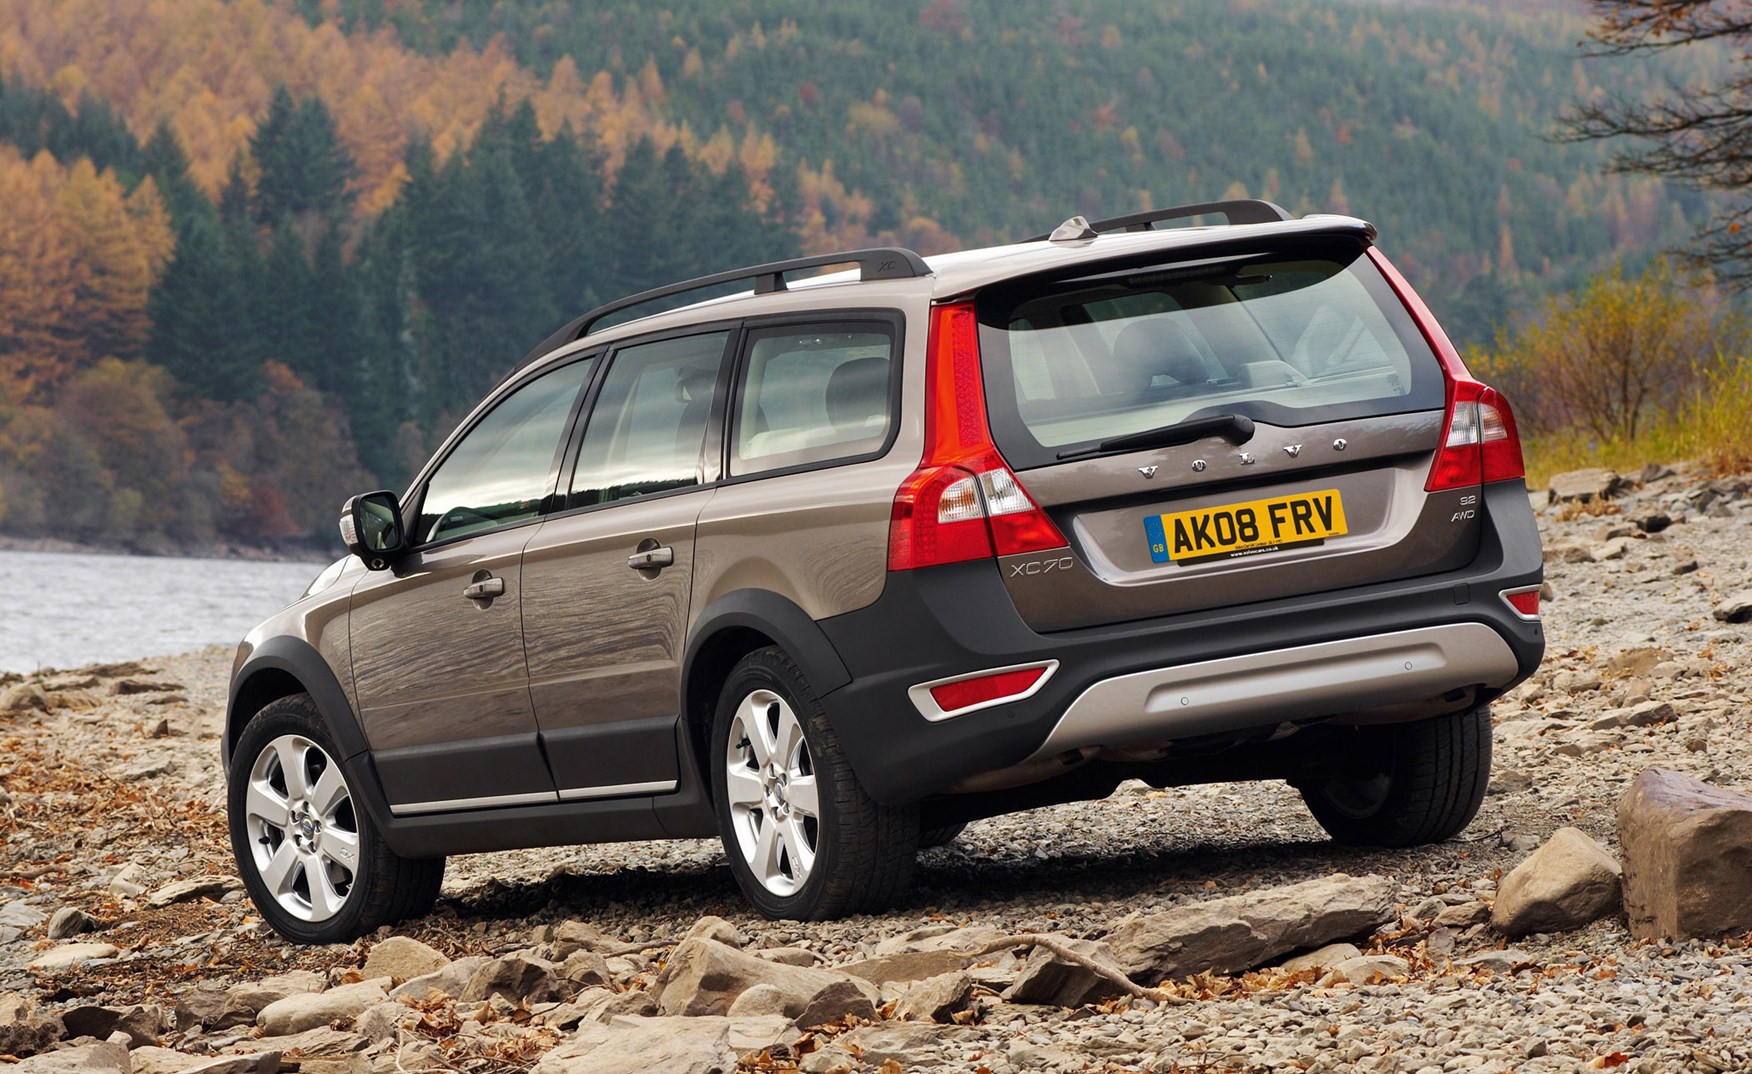 Used Volvo XC70 Estate (2007 - 2016) Review | Parkers